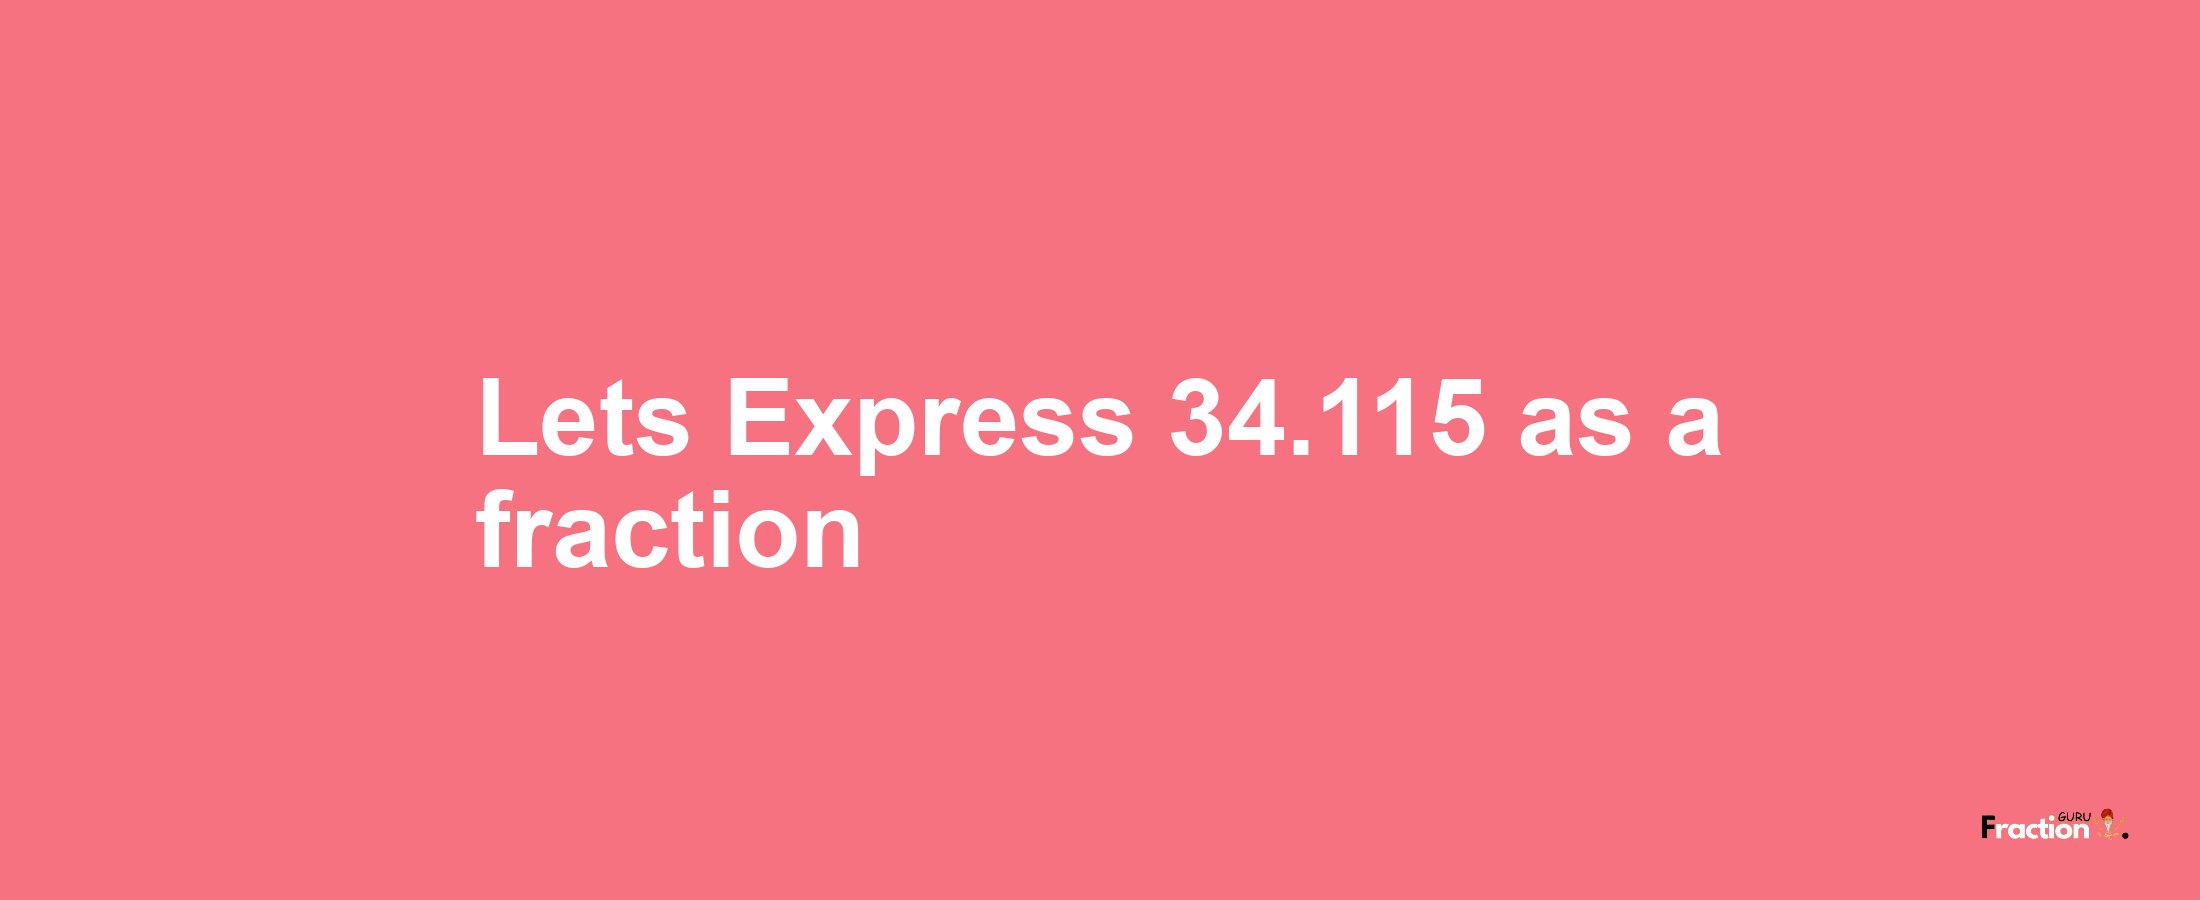 Lets Express 34.115 as afraction